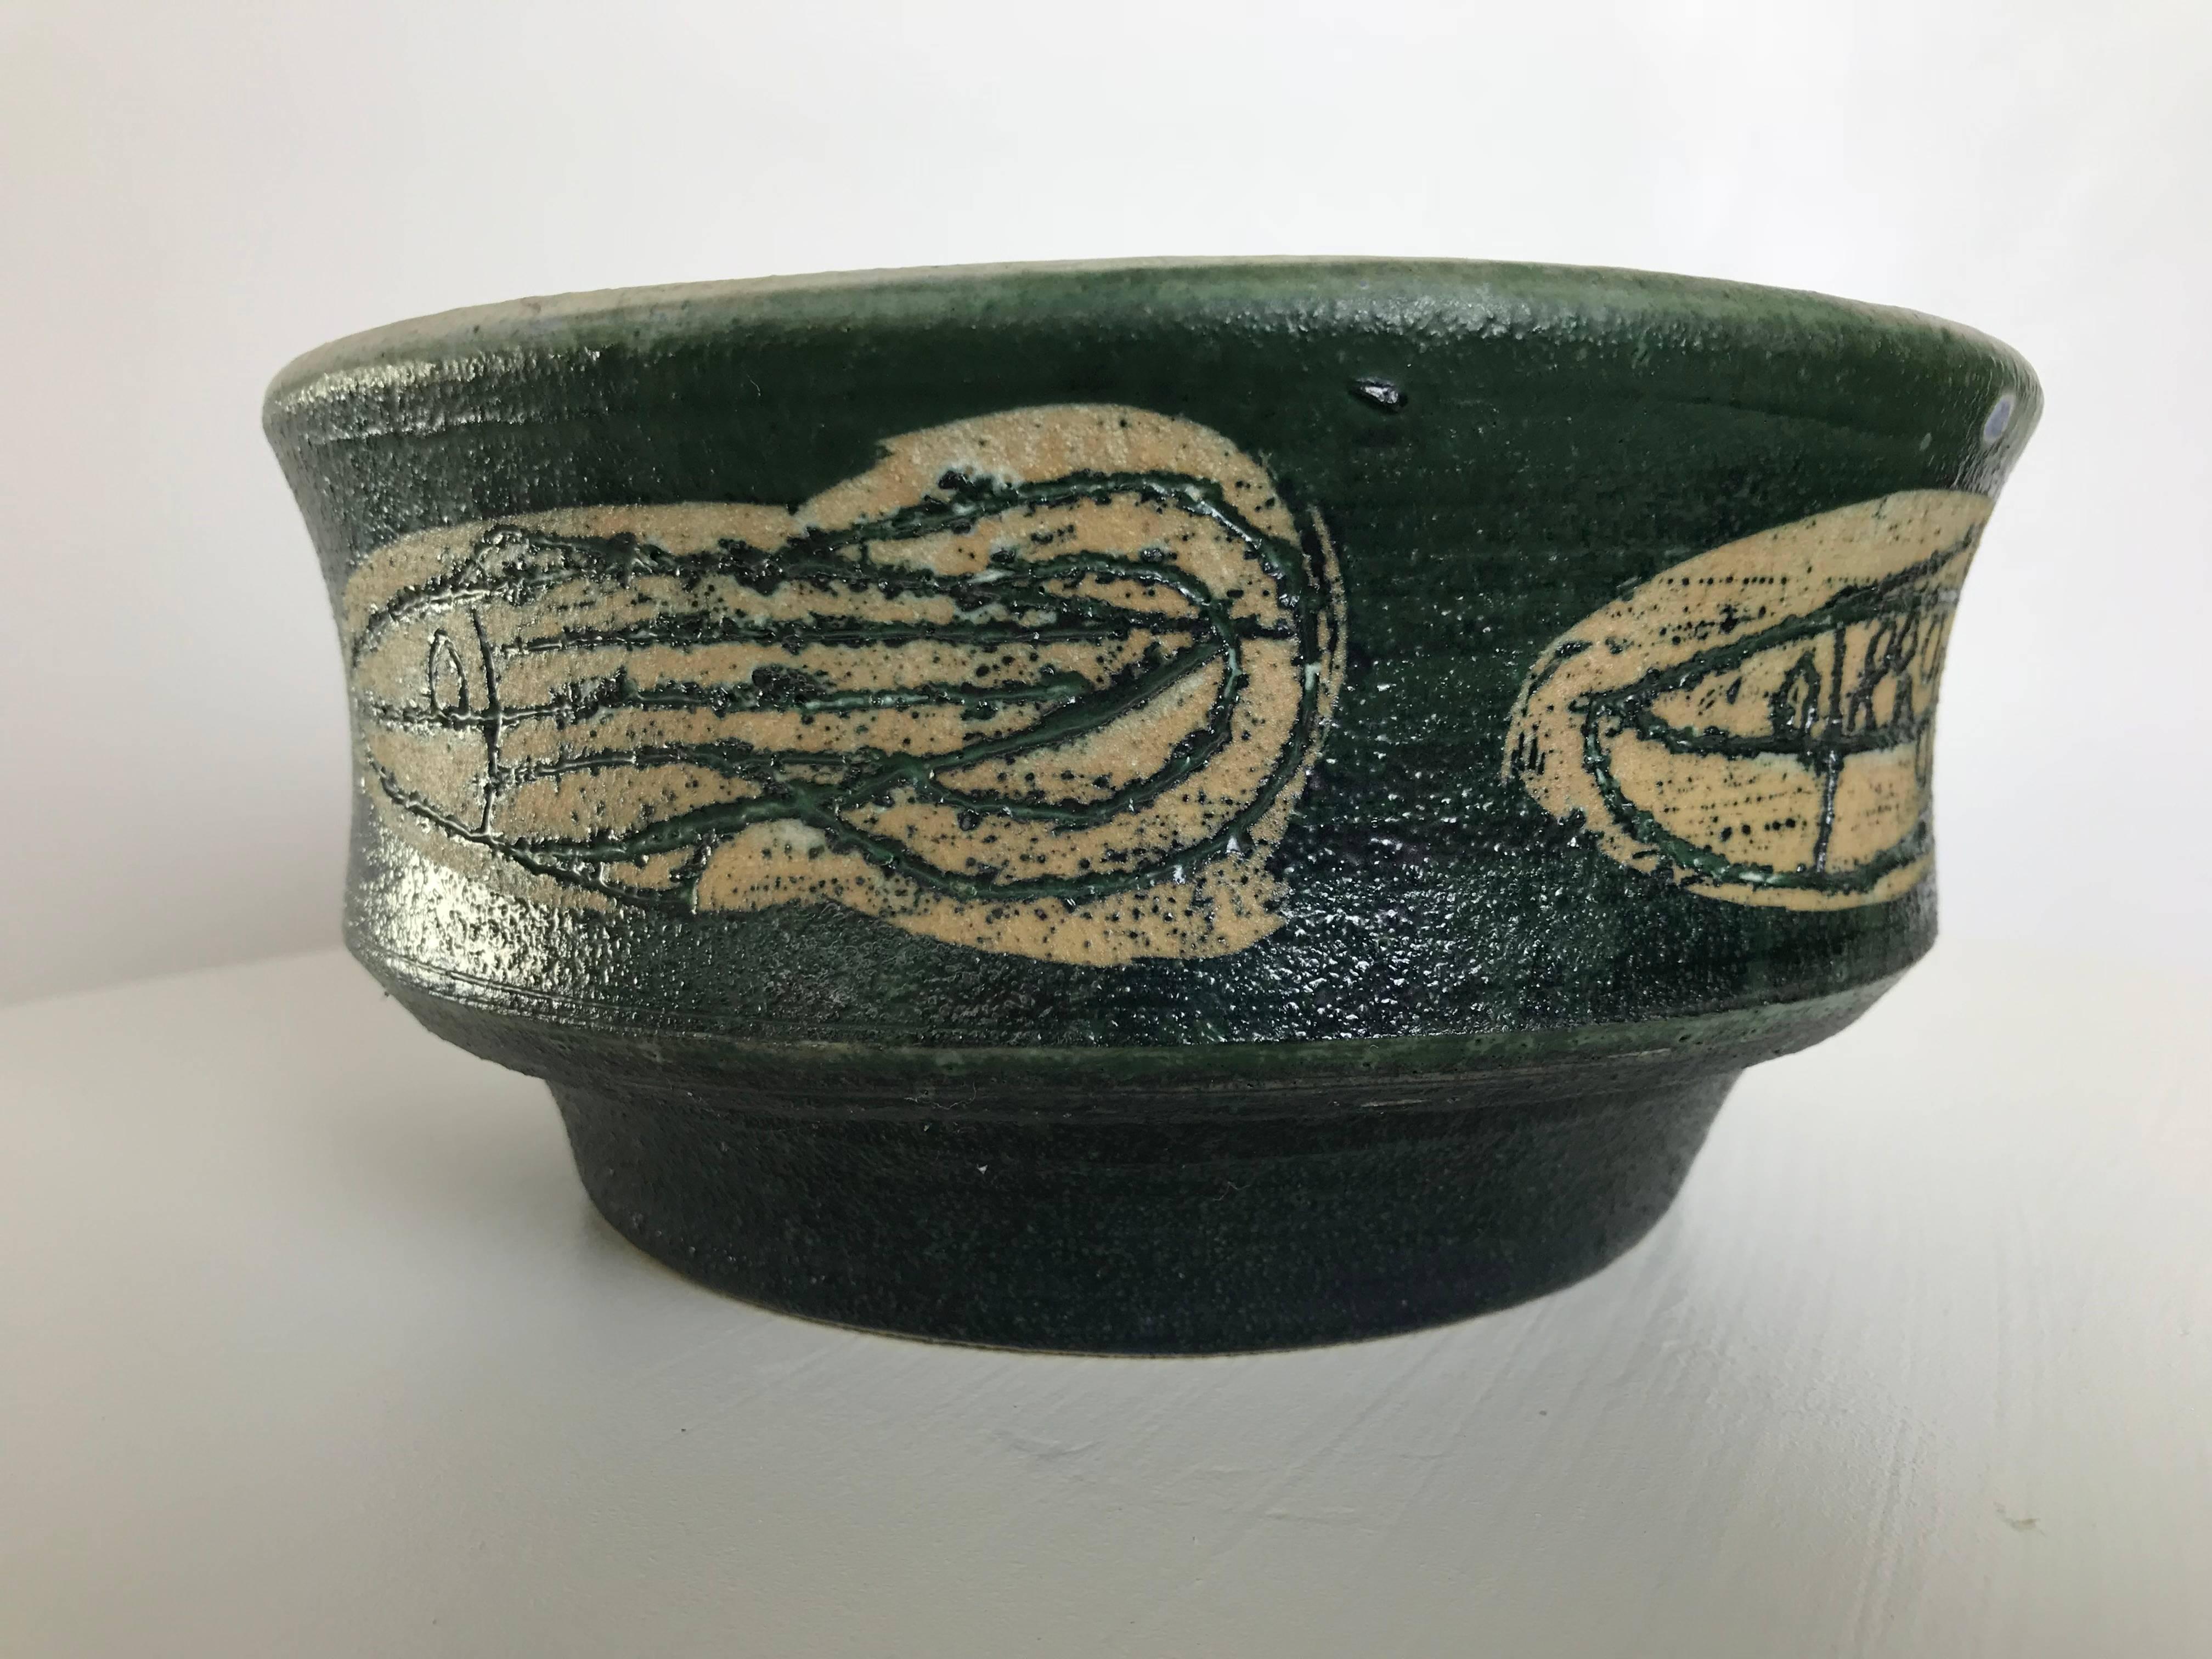 American Modernist Neolithic Fish Studio Ceramic Bowl by Listed Artist Frank Colson